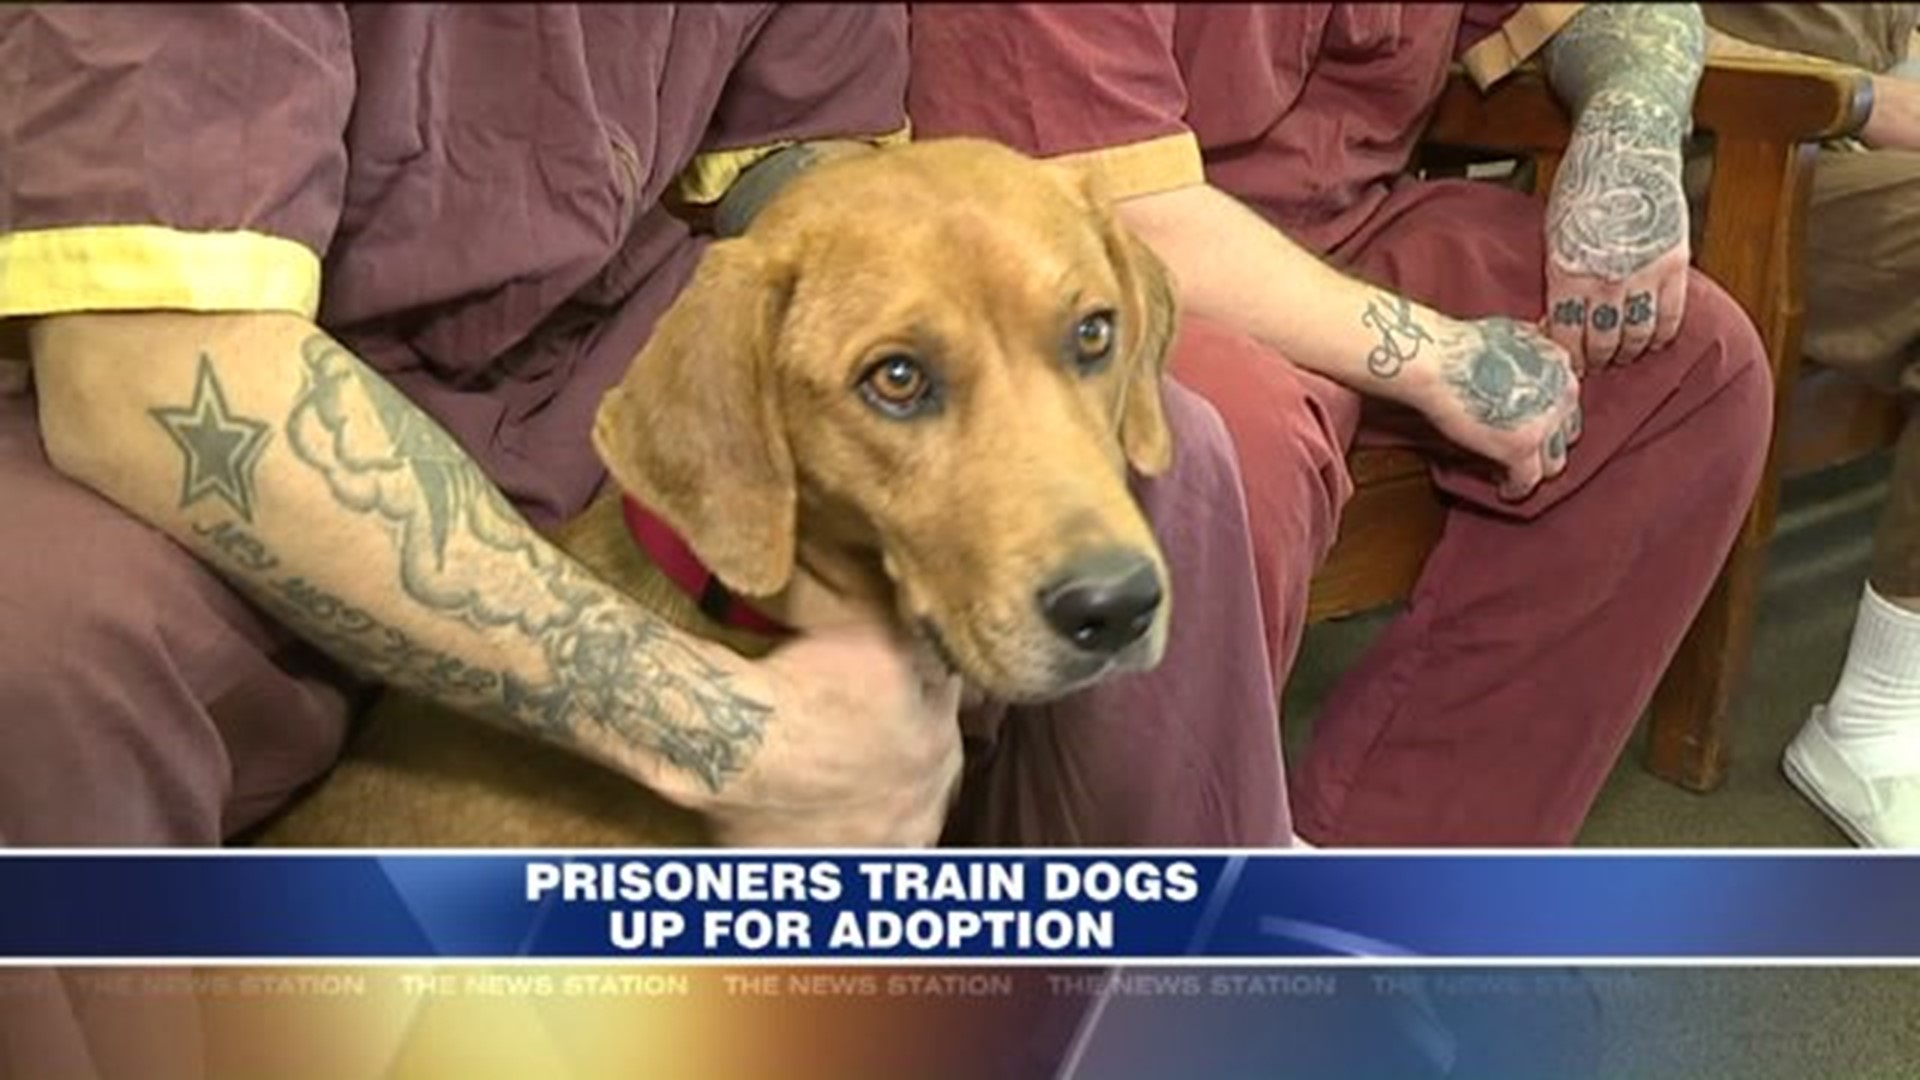 SCI Frackville Inmates Train Dogs Up For Adoption